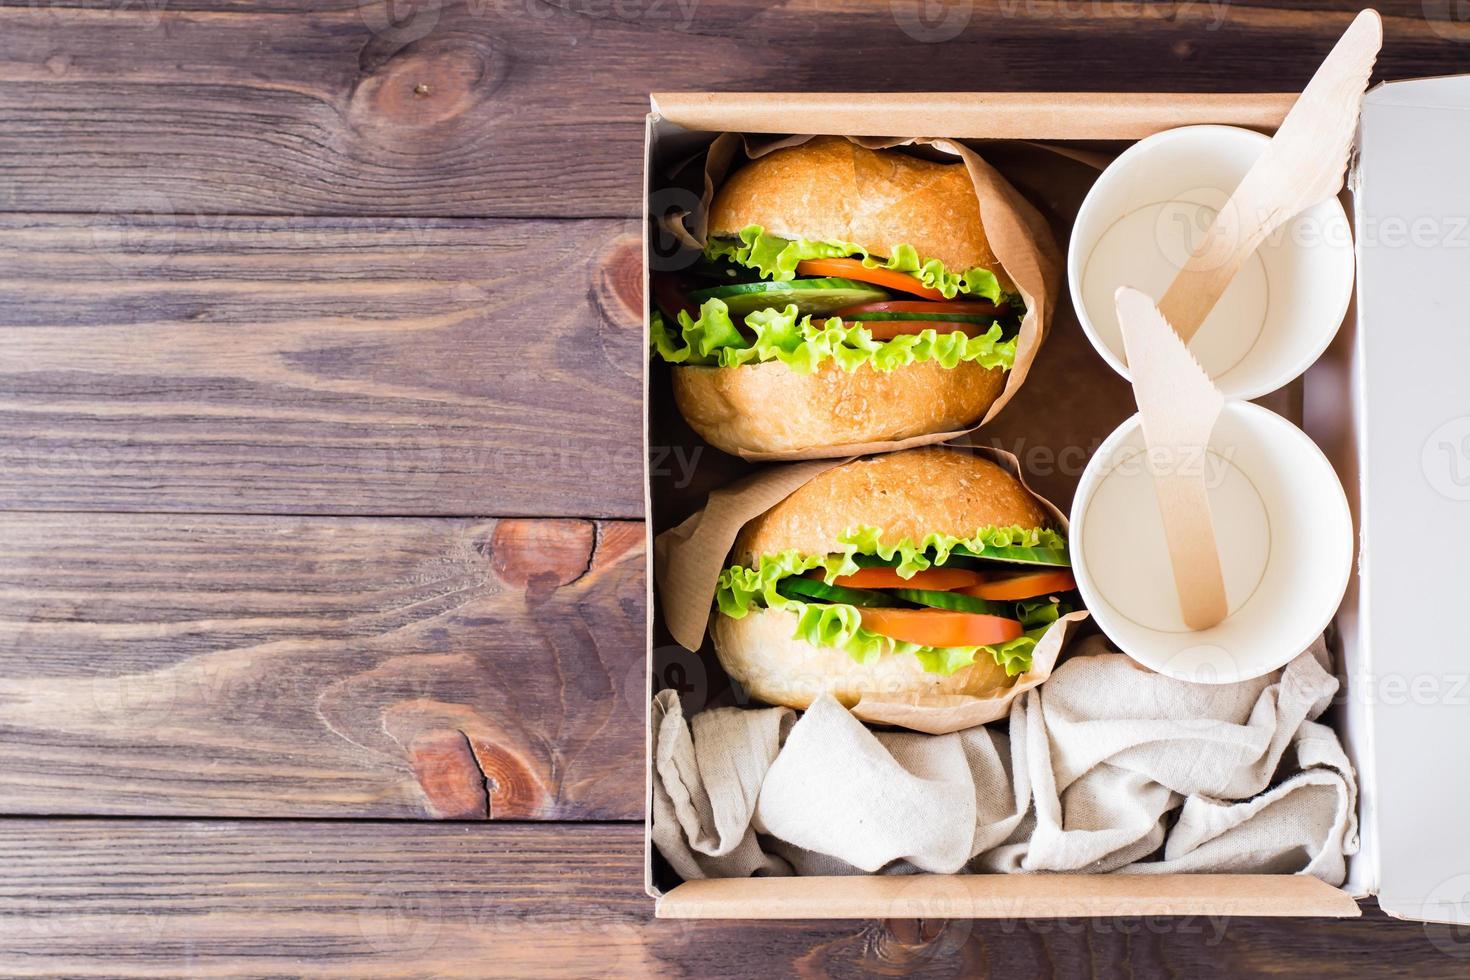 Vegetarian burgers with fresh vegetables and lettuce in a bun in a box. Fast food delivery. Top view photo